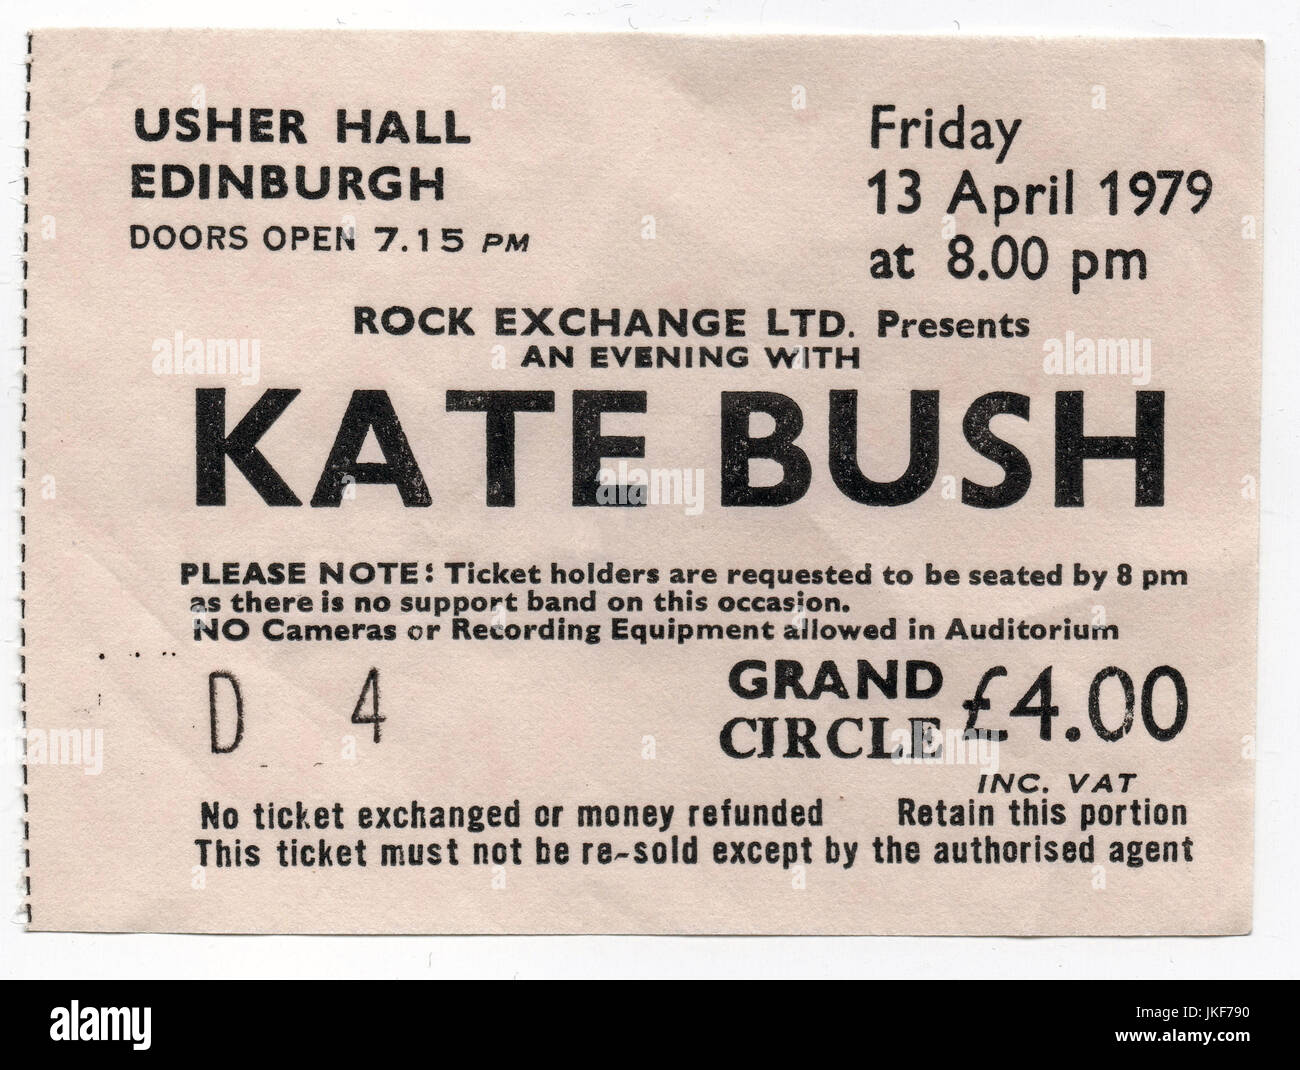 Ticket stub for a Kate Bush concert at the Usher Hall in Edinburgh, 13th April 1979. Stock Photo